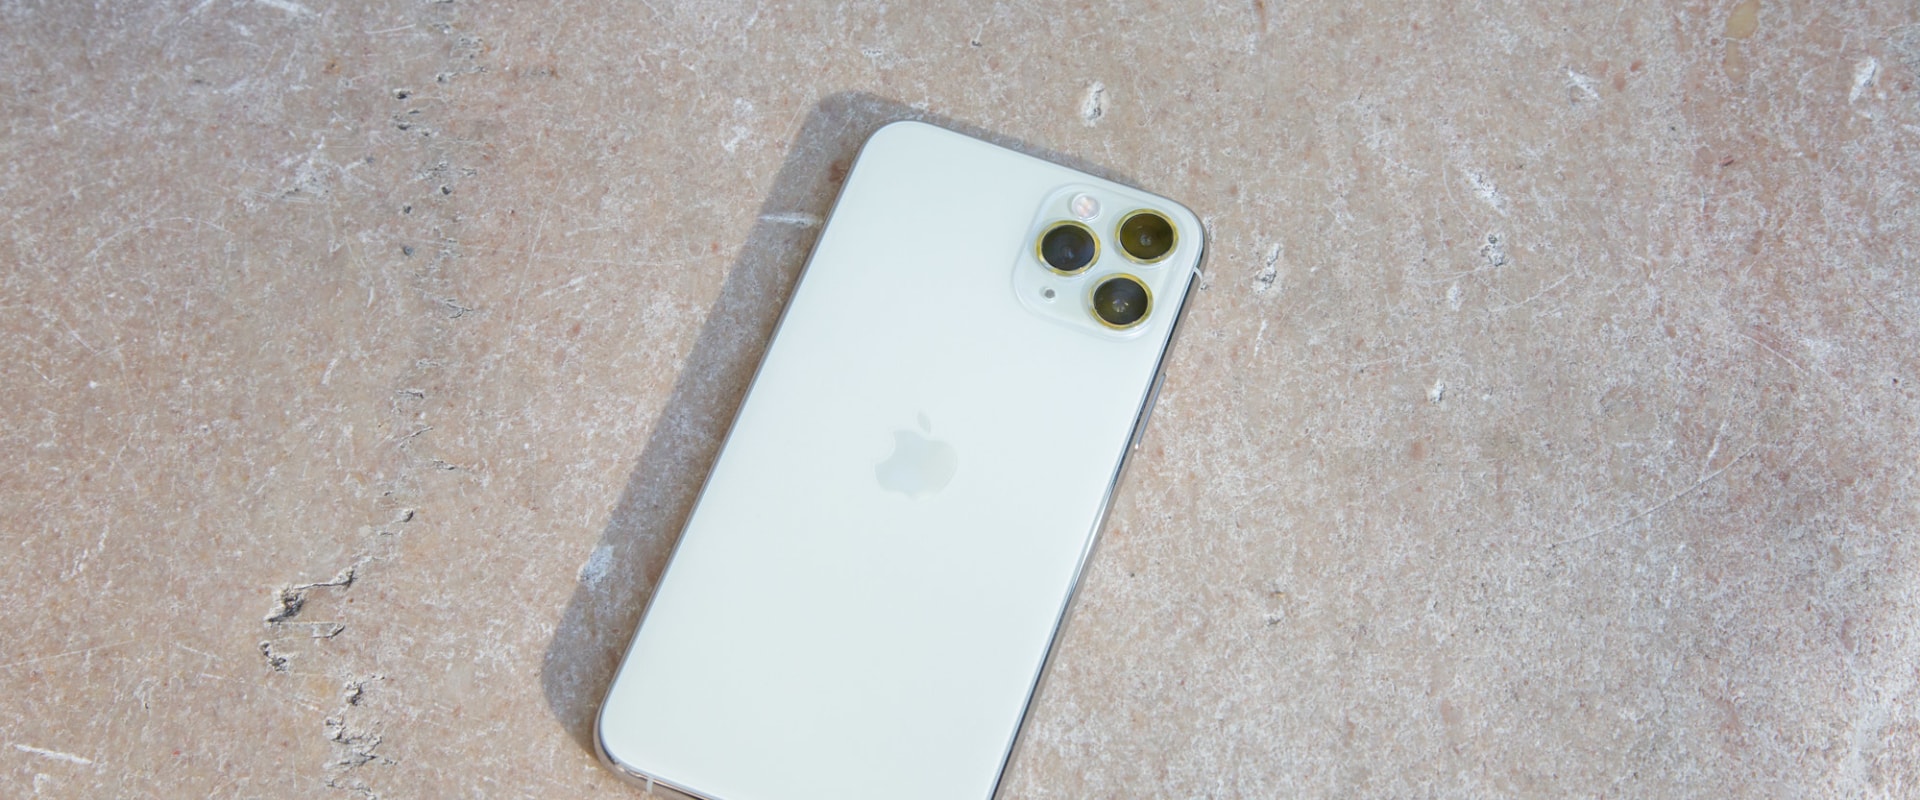 How much is an iphone 11 worth with a cracked screen?